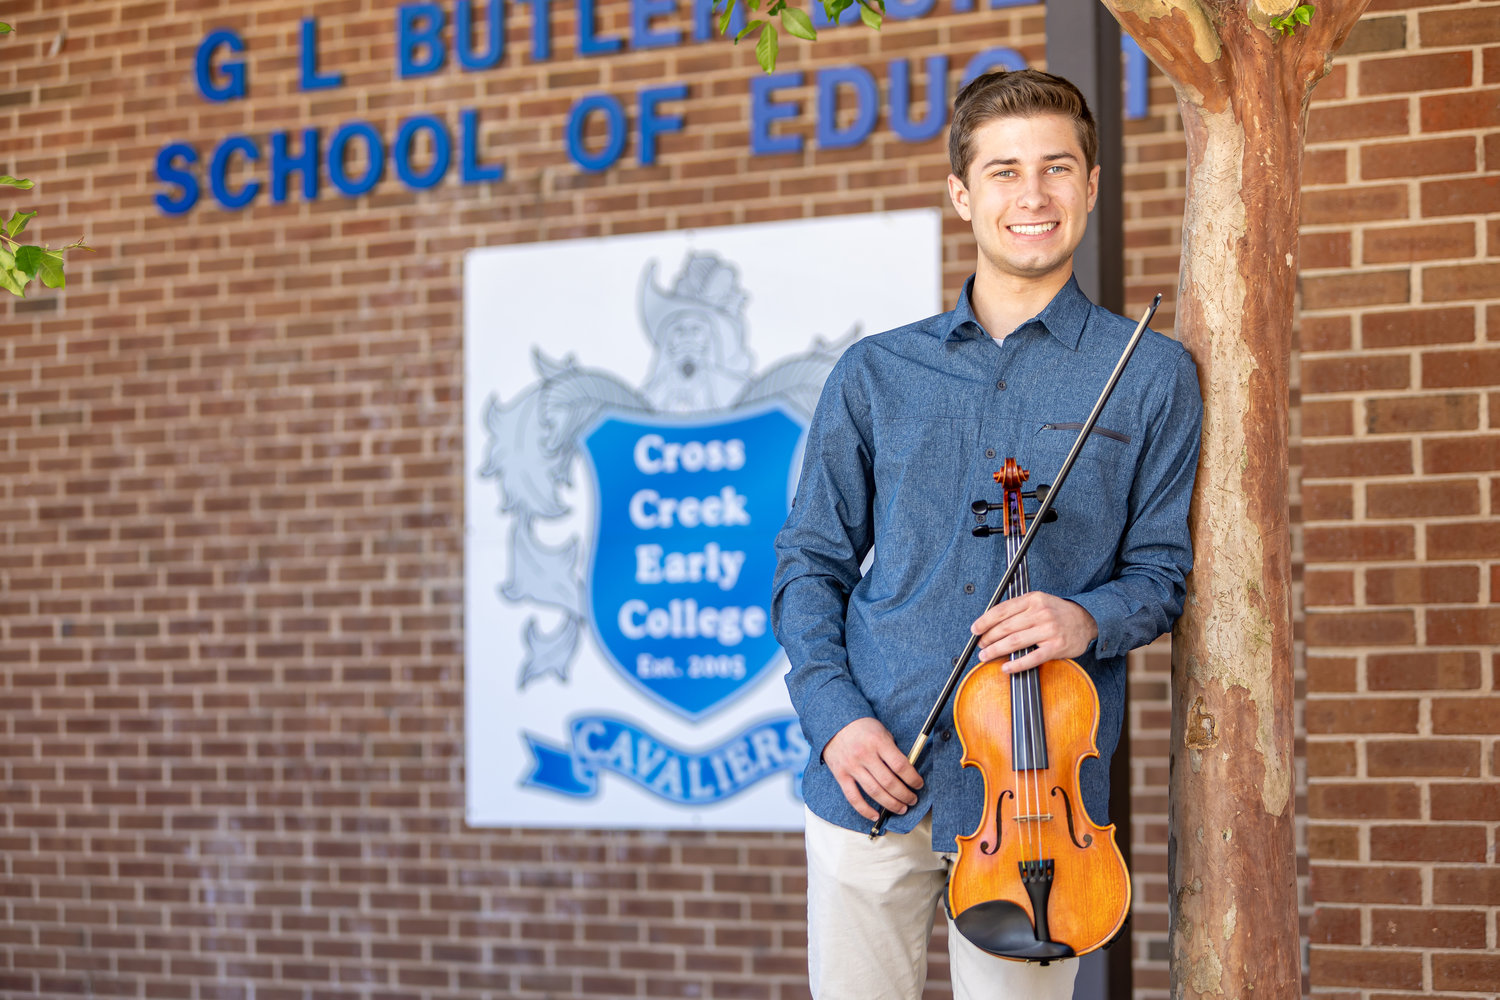 Jefferson Skinner will graduate from Cross Creek Early College High School this year. He enjoys multiple after-school activities, including playing with the Fayetteville Symphony Youth Orchestra’s string and full orchestras and the Eagle Scout program